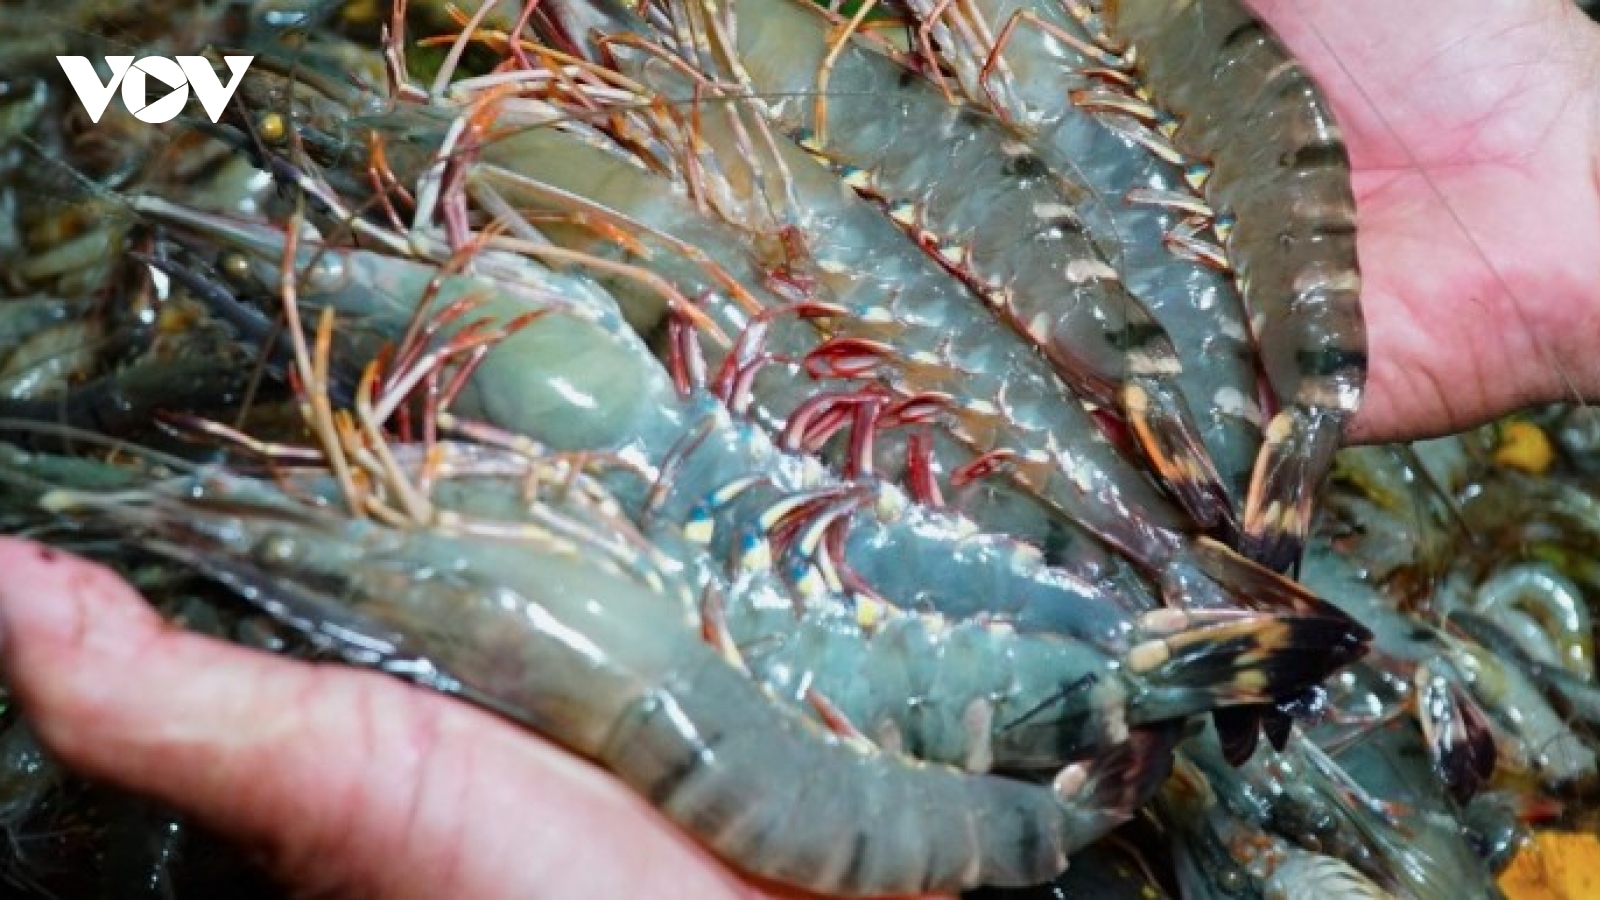 DOC issues conclusion on anti-subsidy probe into Vietnamese shrimp